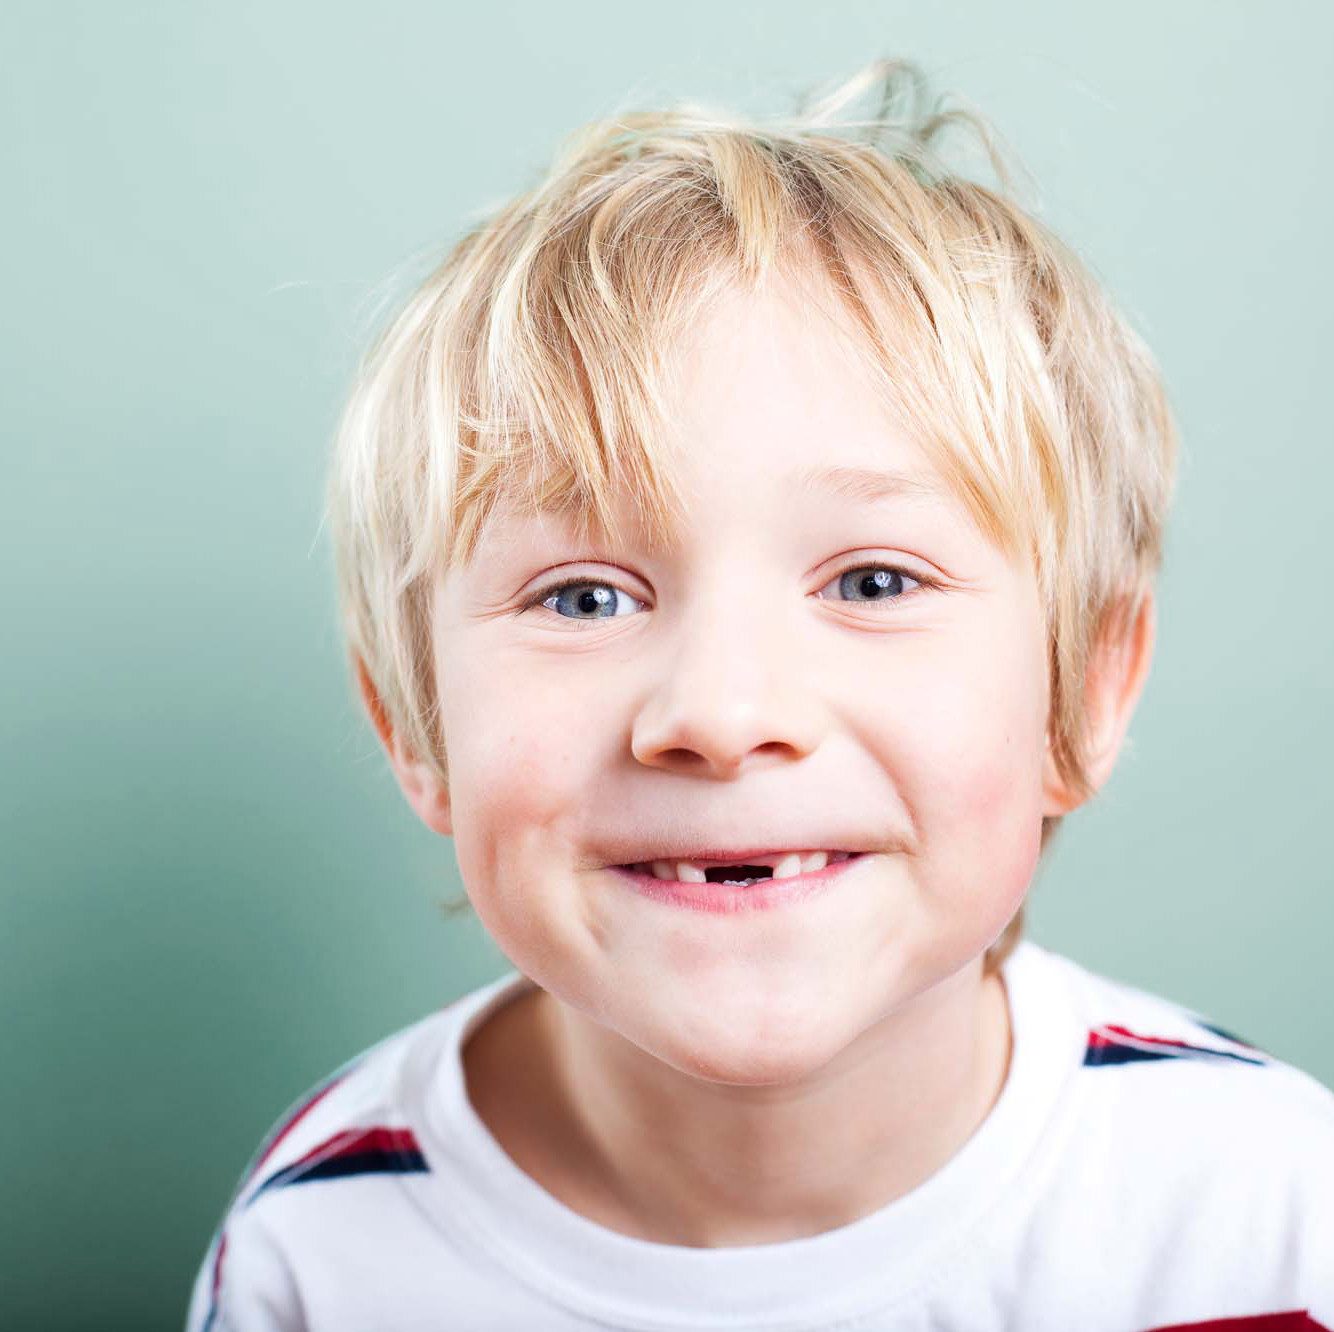 6-7 Years, 8-9 Years, Babies And Children, Blond Hair, Blue, Brightly Lit, Casual, Cheerful, Cheesy Grin, Child, Close-up, Copy Space, Cute, Elementary Age, Excitement, Gap, Happiness, Head And Shoulders, Horizontal, Human Teeth, Innocence, Isolated, Isolated Objects, Isolated On Blue, Lifestyle, Little Boys, Looking At Camera, Nerd, One Person, People, People, Portrait, Real People, Smiling, Toothless Smile, Turquoise